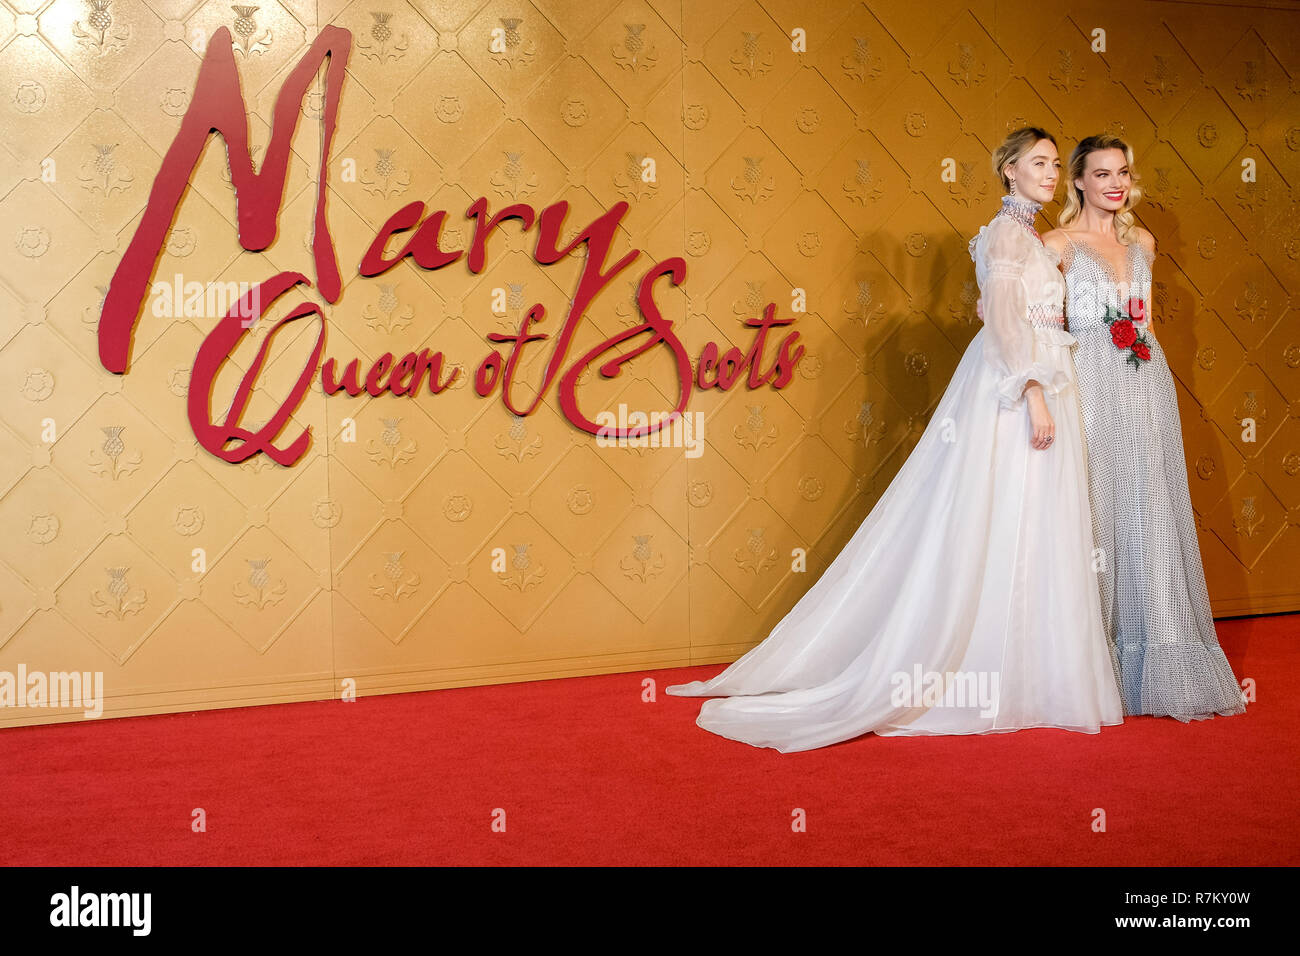 London, UK. 10th Dec 2018. Saoirse Ronan and Margot Robbie at Mary Queen Of Scots European Premiere on Monday 10 December 2018 held at Cineworld Leicester Square, London. Pictured: Saoirse Ronan, Margot Robbie. Credit: Julie Edwards/Alamy Live News Stock Photo